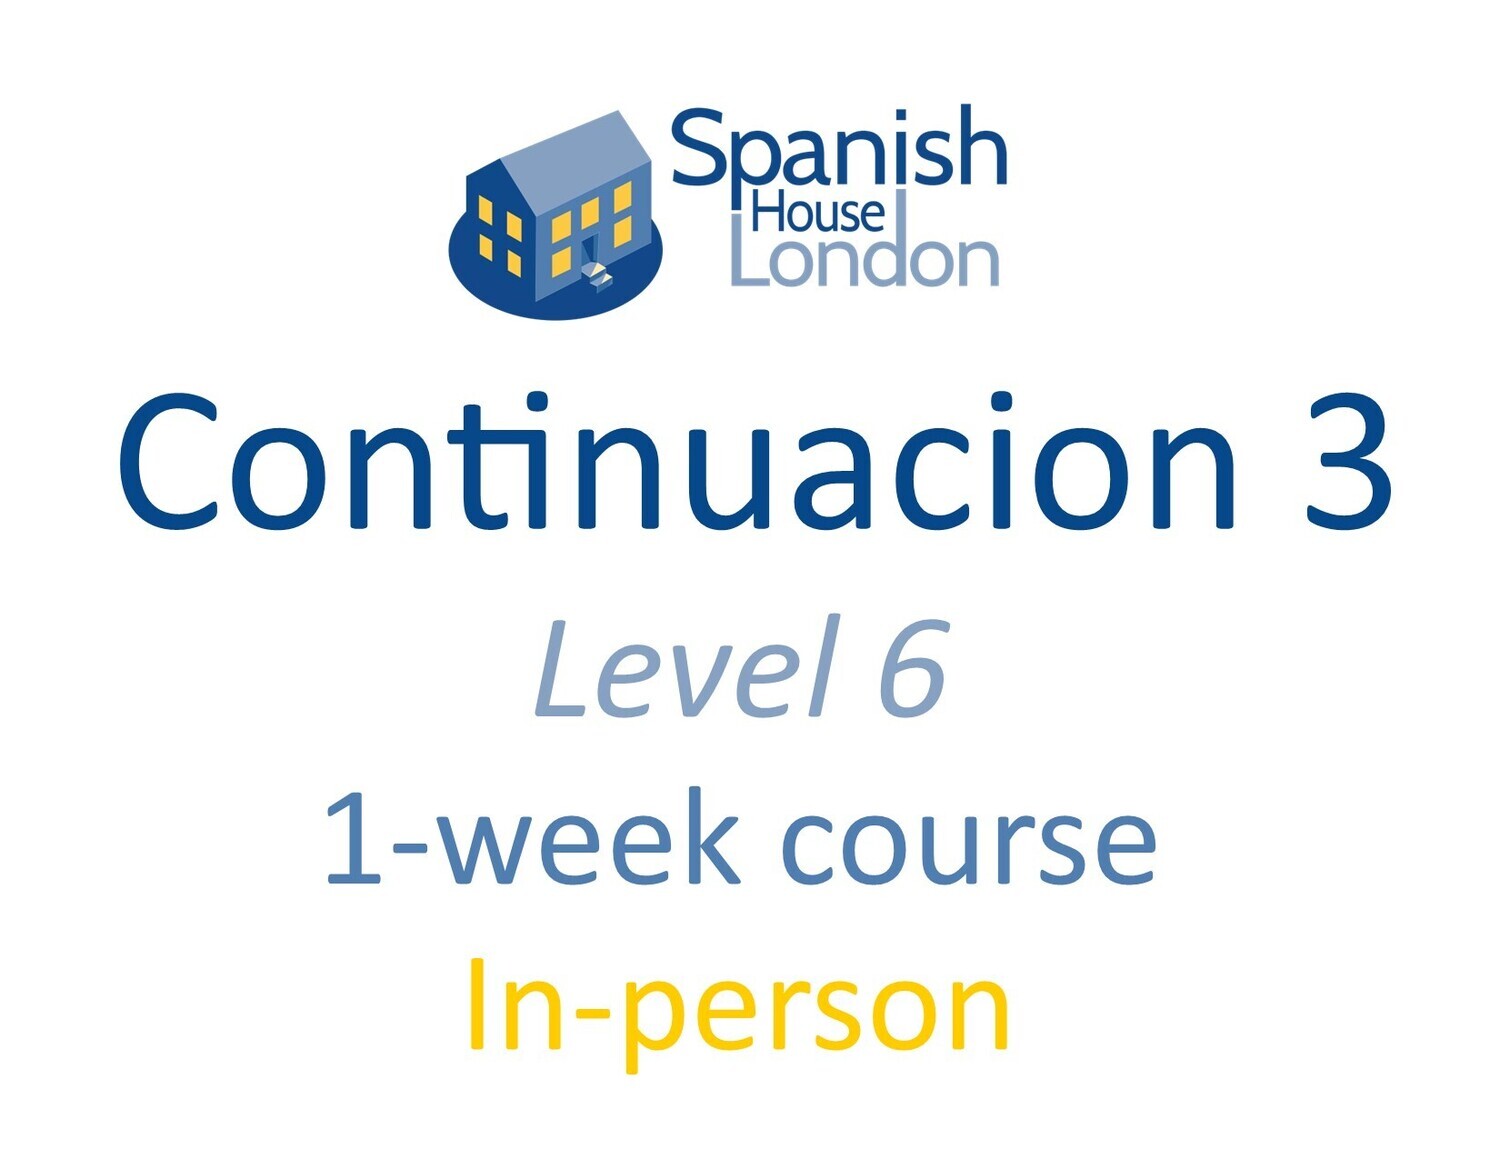 One-Week Intensive Continuacion 3 Course starting on 30th October at 10.30am in Clapham North